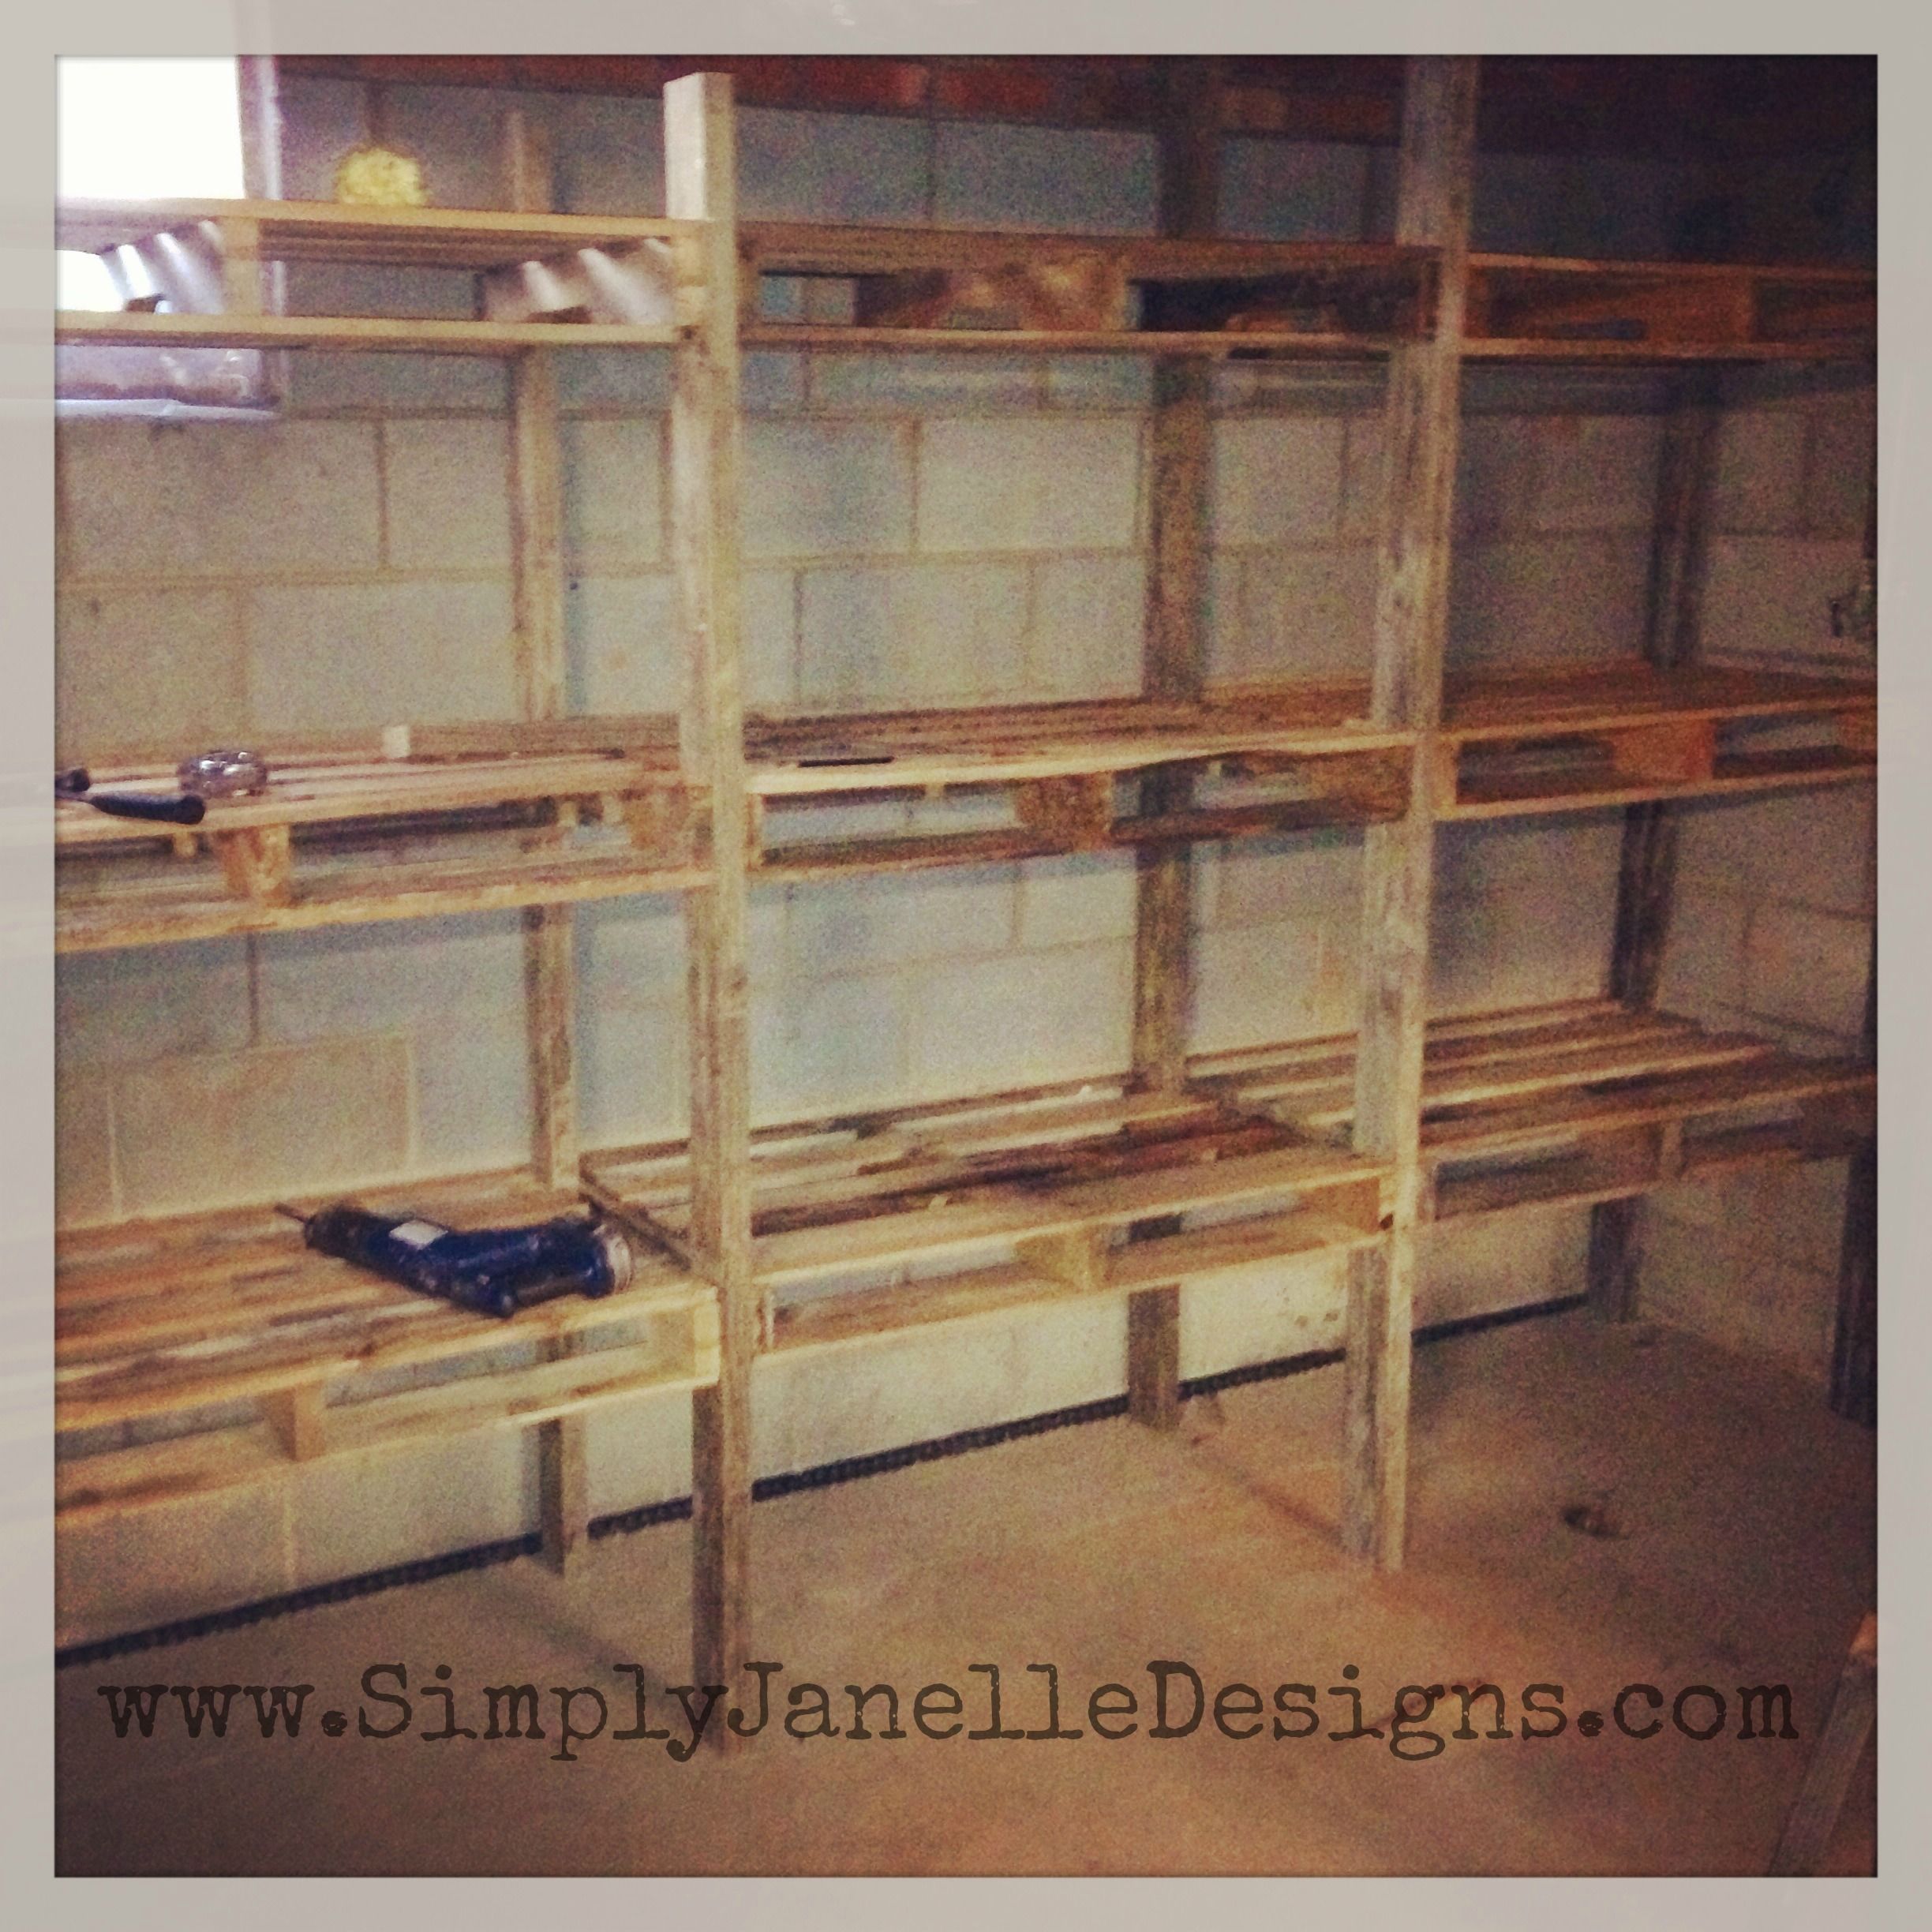 Pallet Shelves in our Basement | Simply Janelle Designs